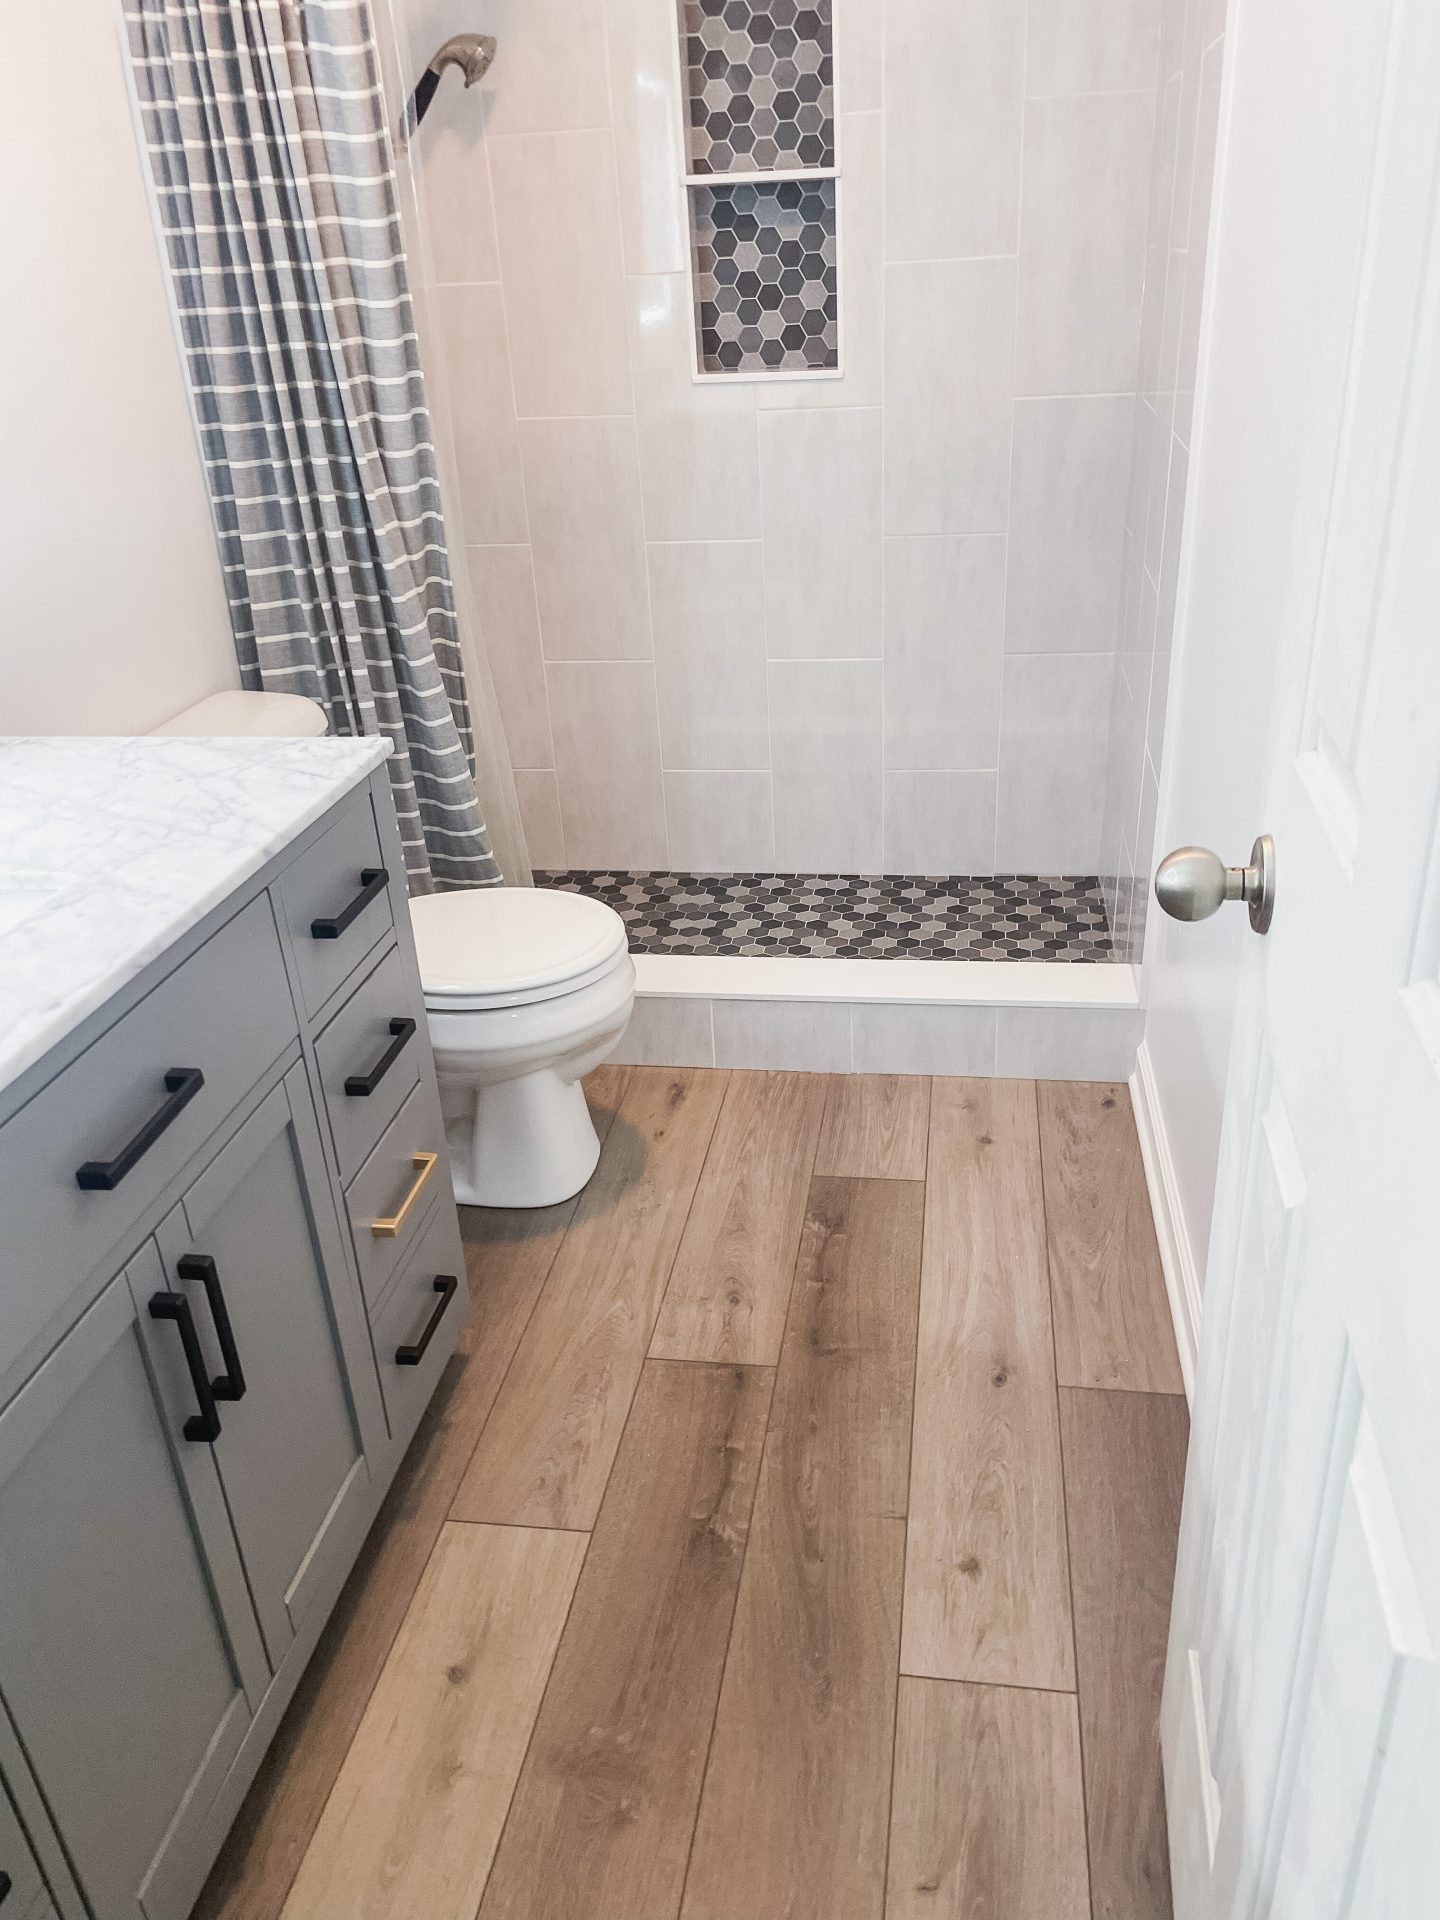 Midwest Remodel specializes in remodeling bathrooms.